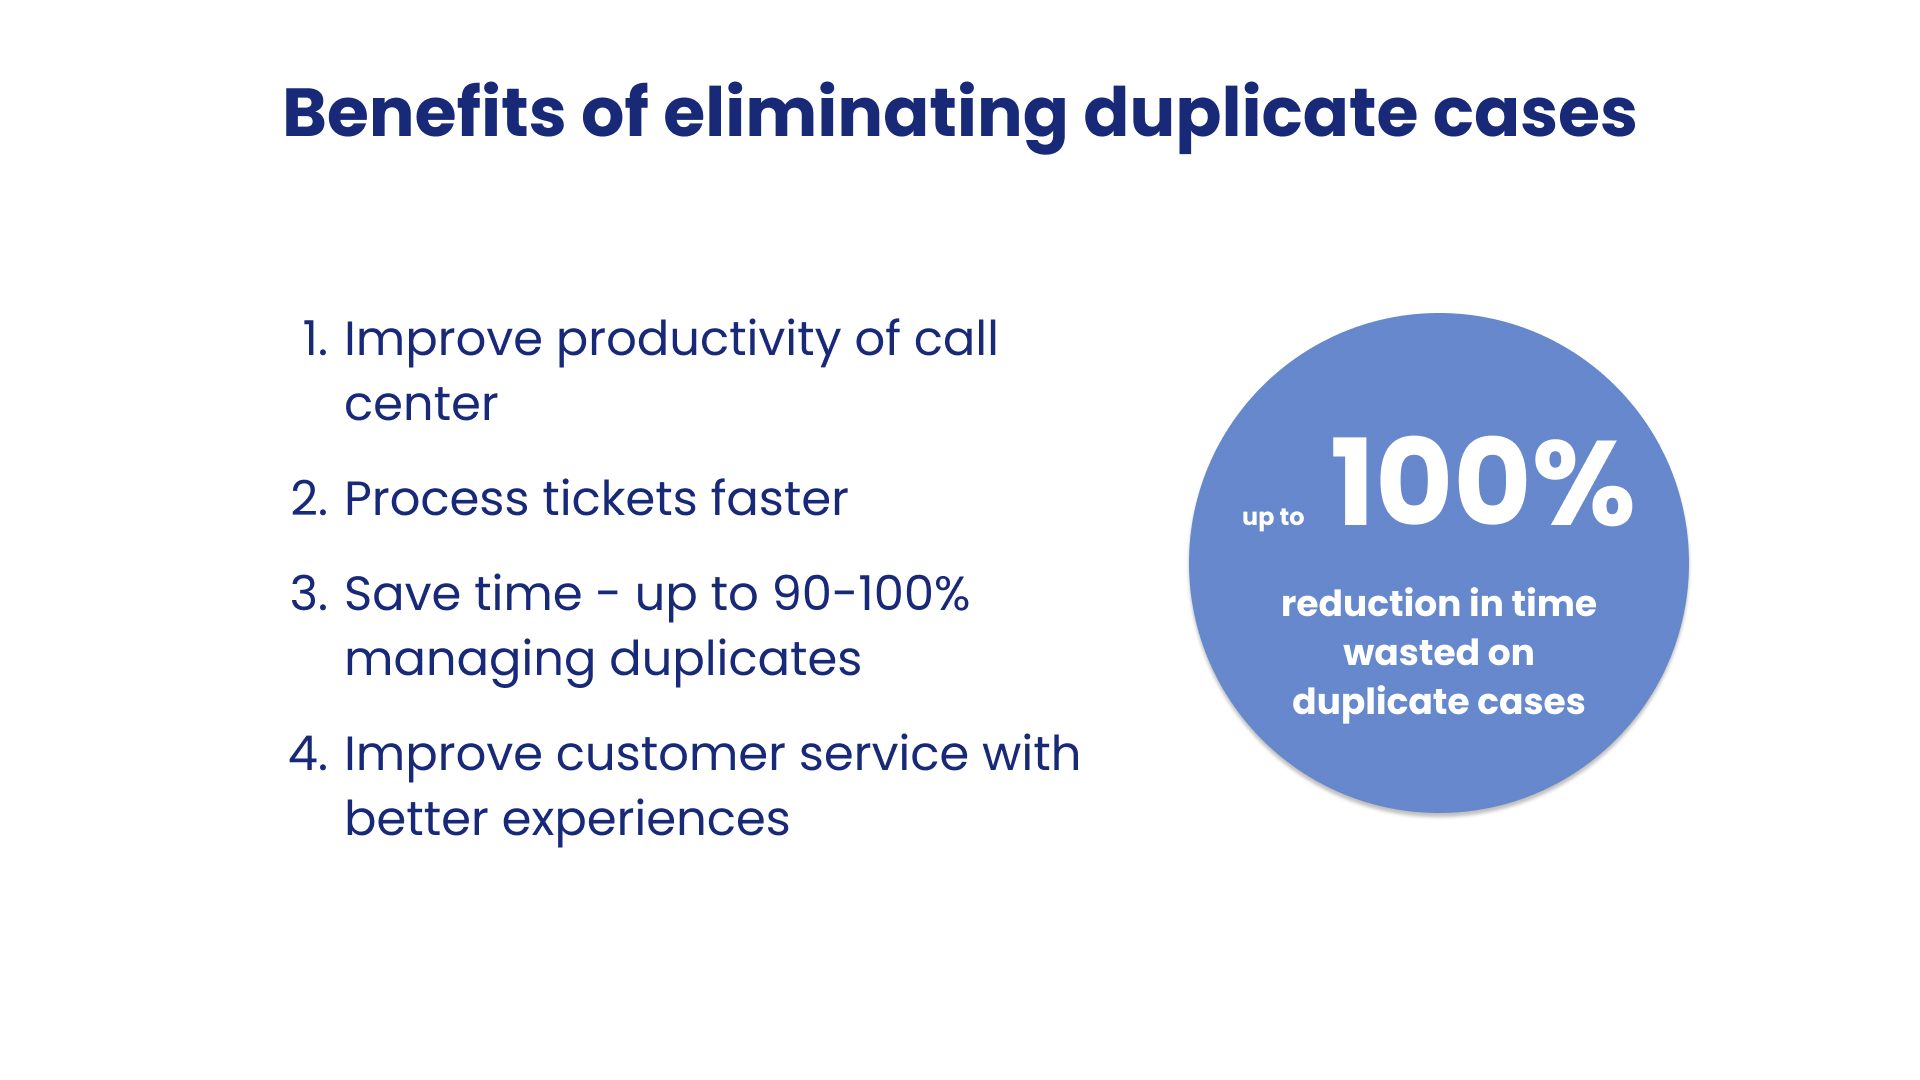 Users can save up to 100% of wasted resources on managing duplicate cases.